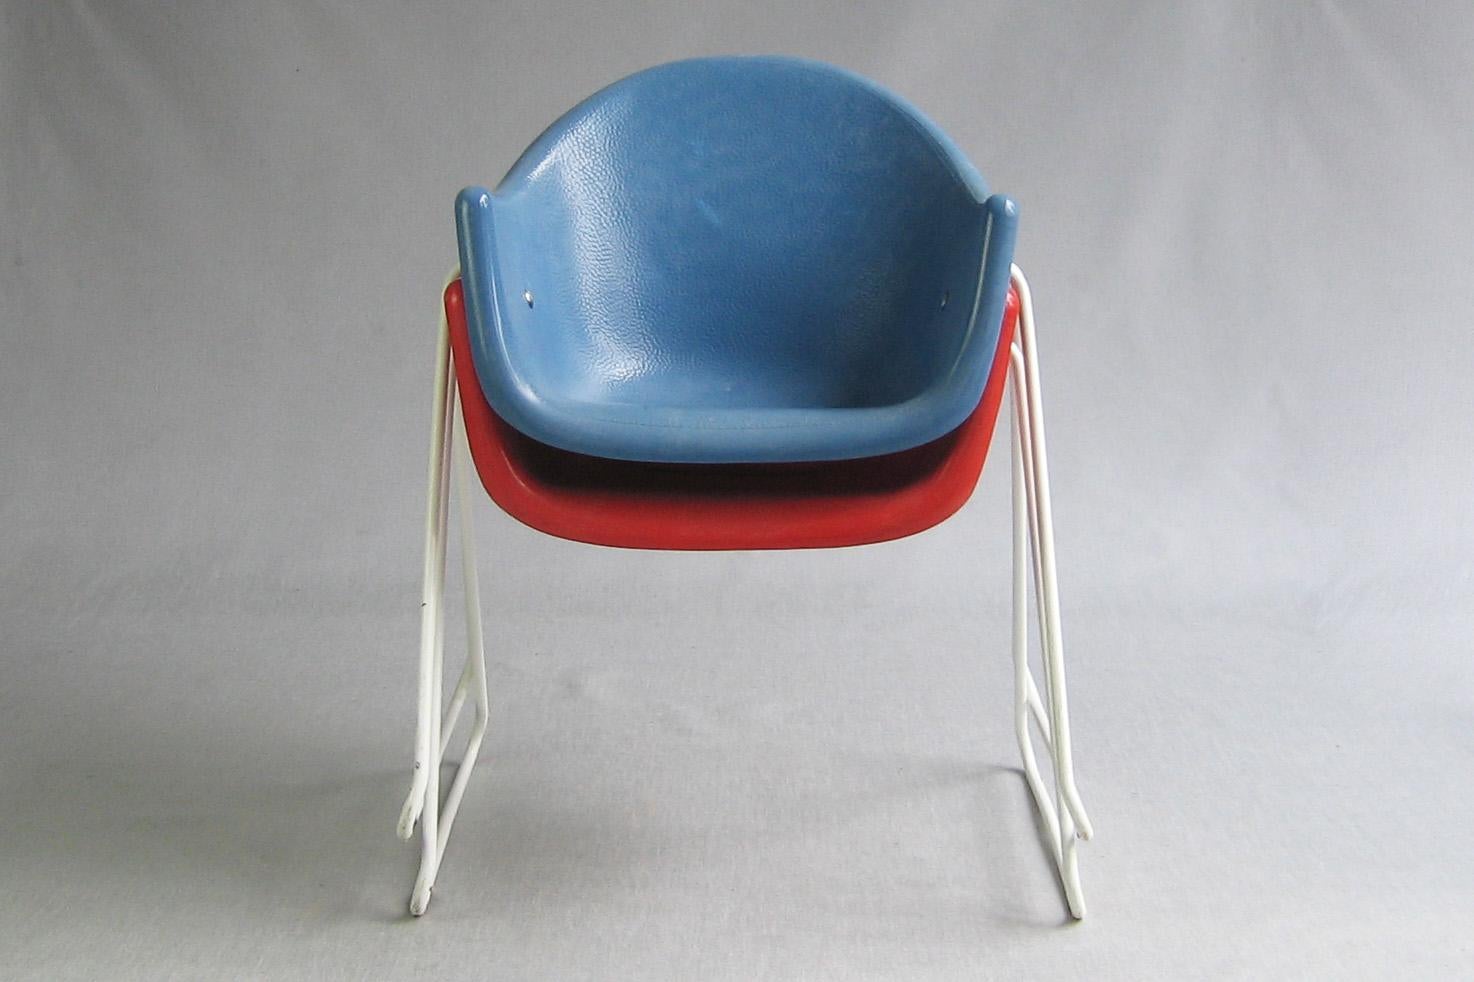 Mid-Century Modern Pair of Walter Papst kids chairs, Wilkhahn, Germany 1961 - 1968 For Sale